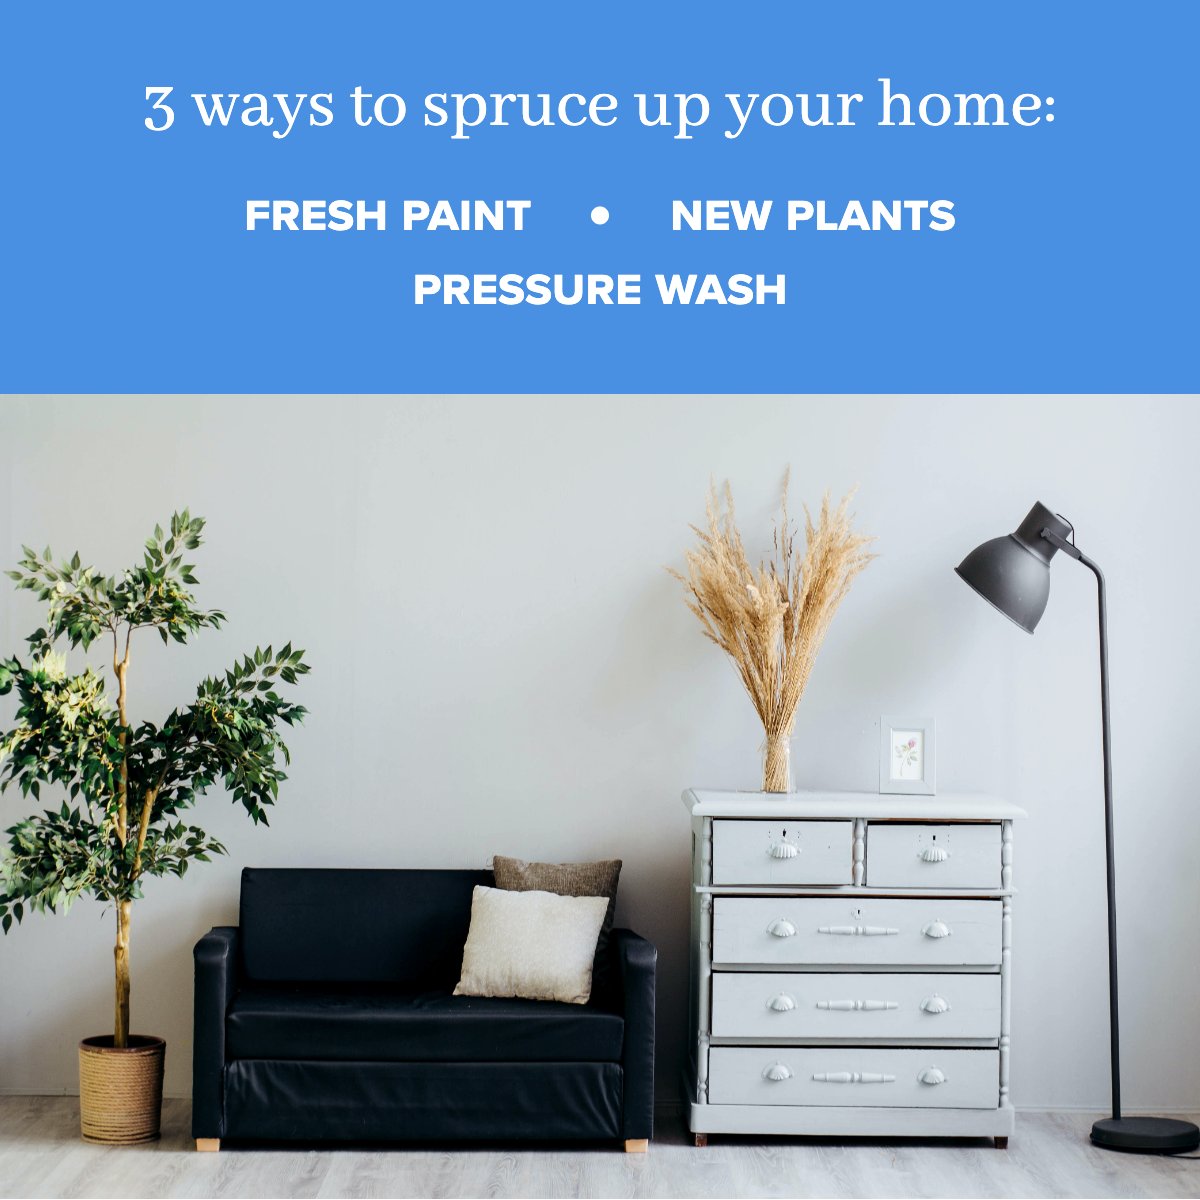 Try this tip to spruce up your home! 😎

Leave us your best design tip! 👇

#home   #spruce   #design   #modern   #realestate
#seattle #seattlehomes #seattlehomesforsale #seattleviews #seattlewaterfronthomes #seattlecondos #seattlecondosforsale #seattlerealestate